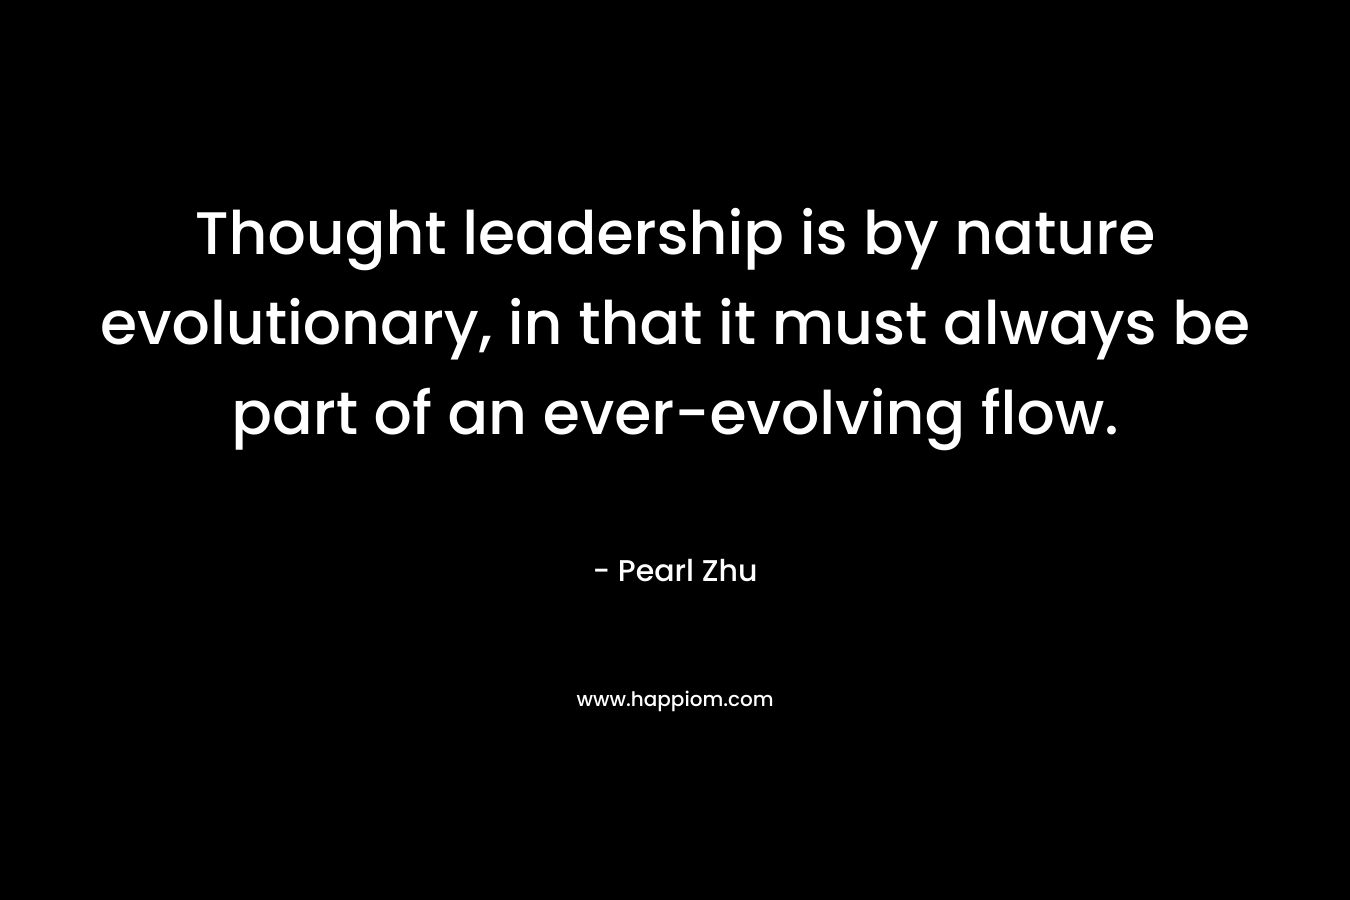 Thought leadership is by nature evolutionary, in that it must always be part of an ever-evolving flow. – Pearl Zhu